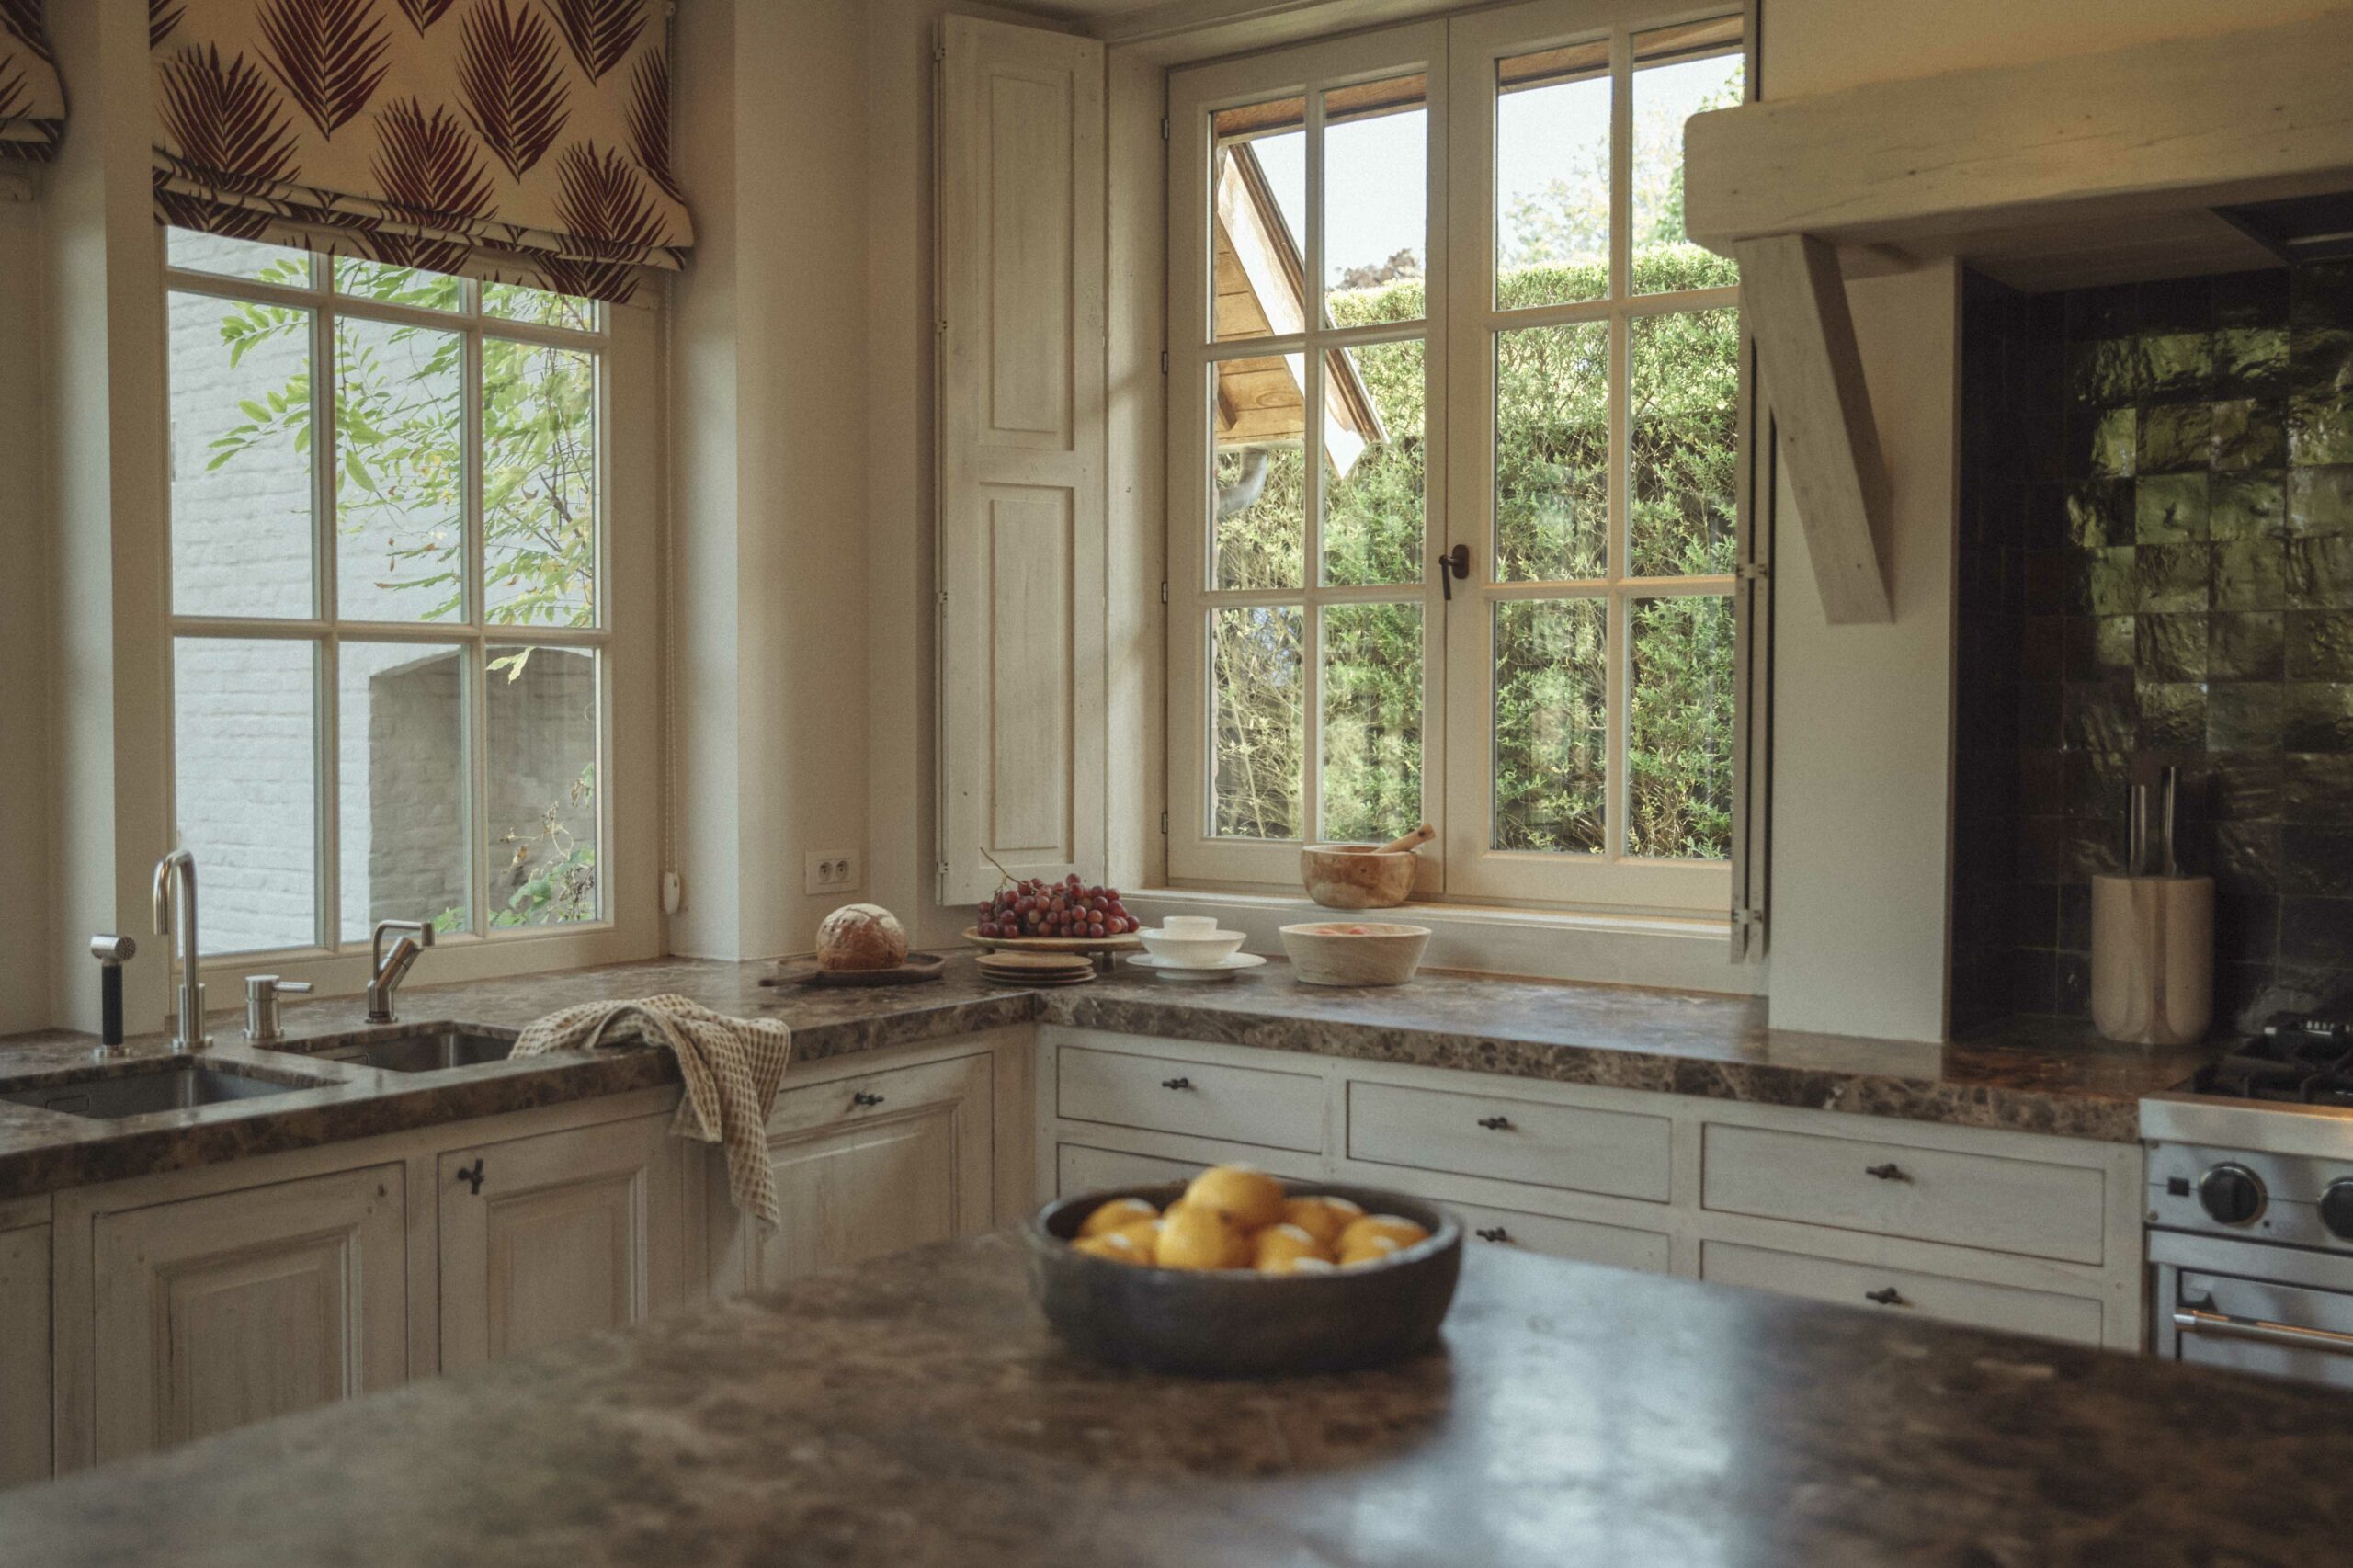 A cozy kitchen with granite counters, rustic white cabinets, modern fixtures, and large windows. Bowls of fruit add a homely touch.